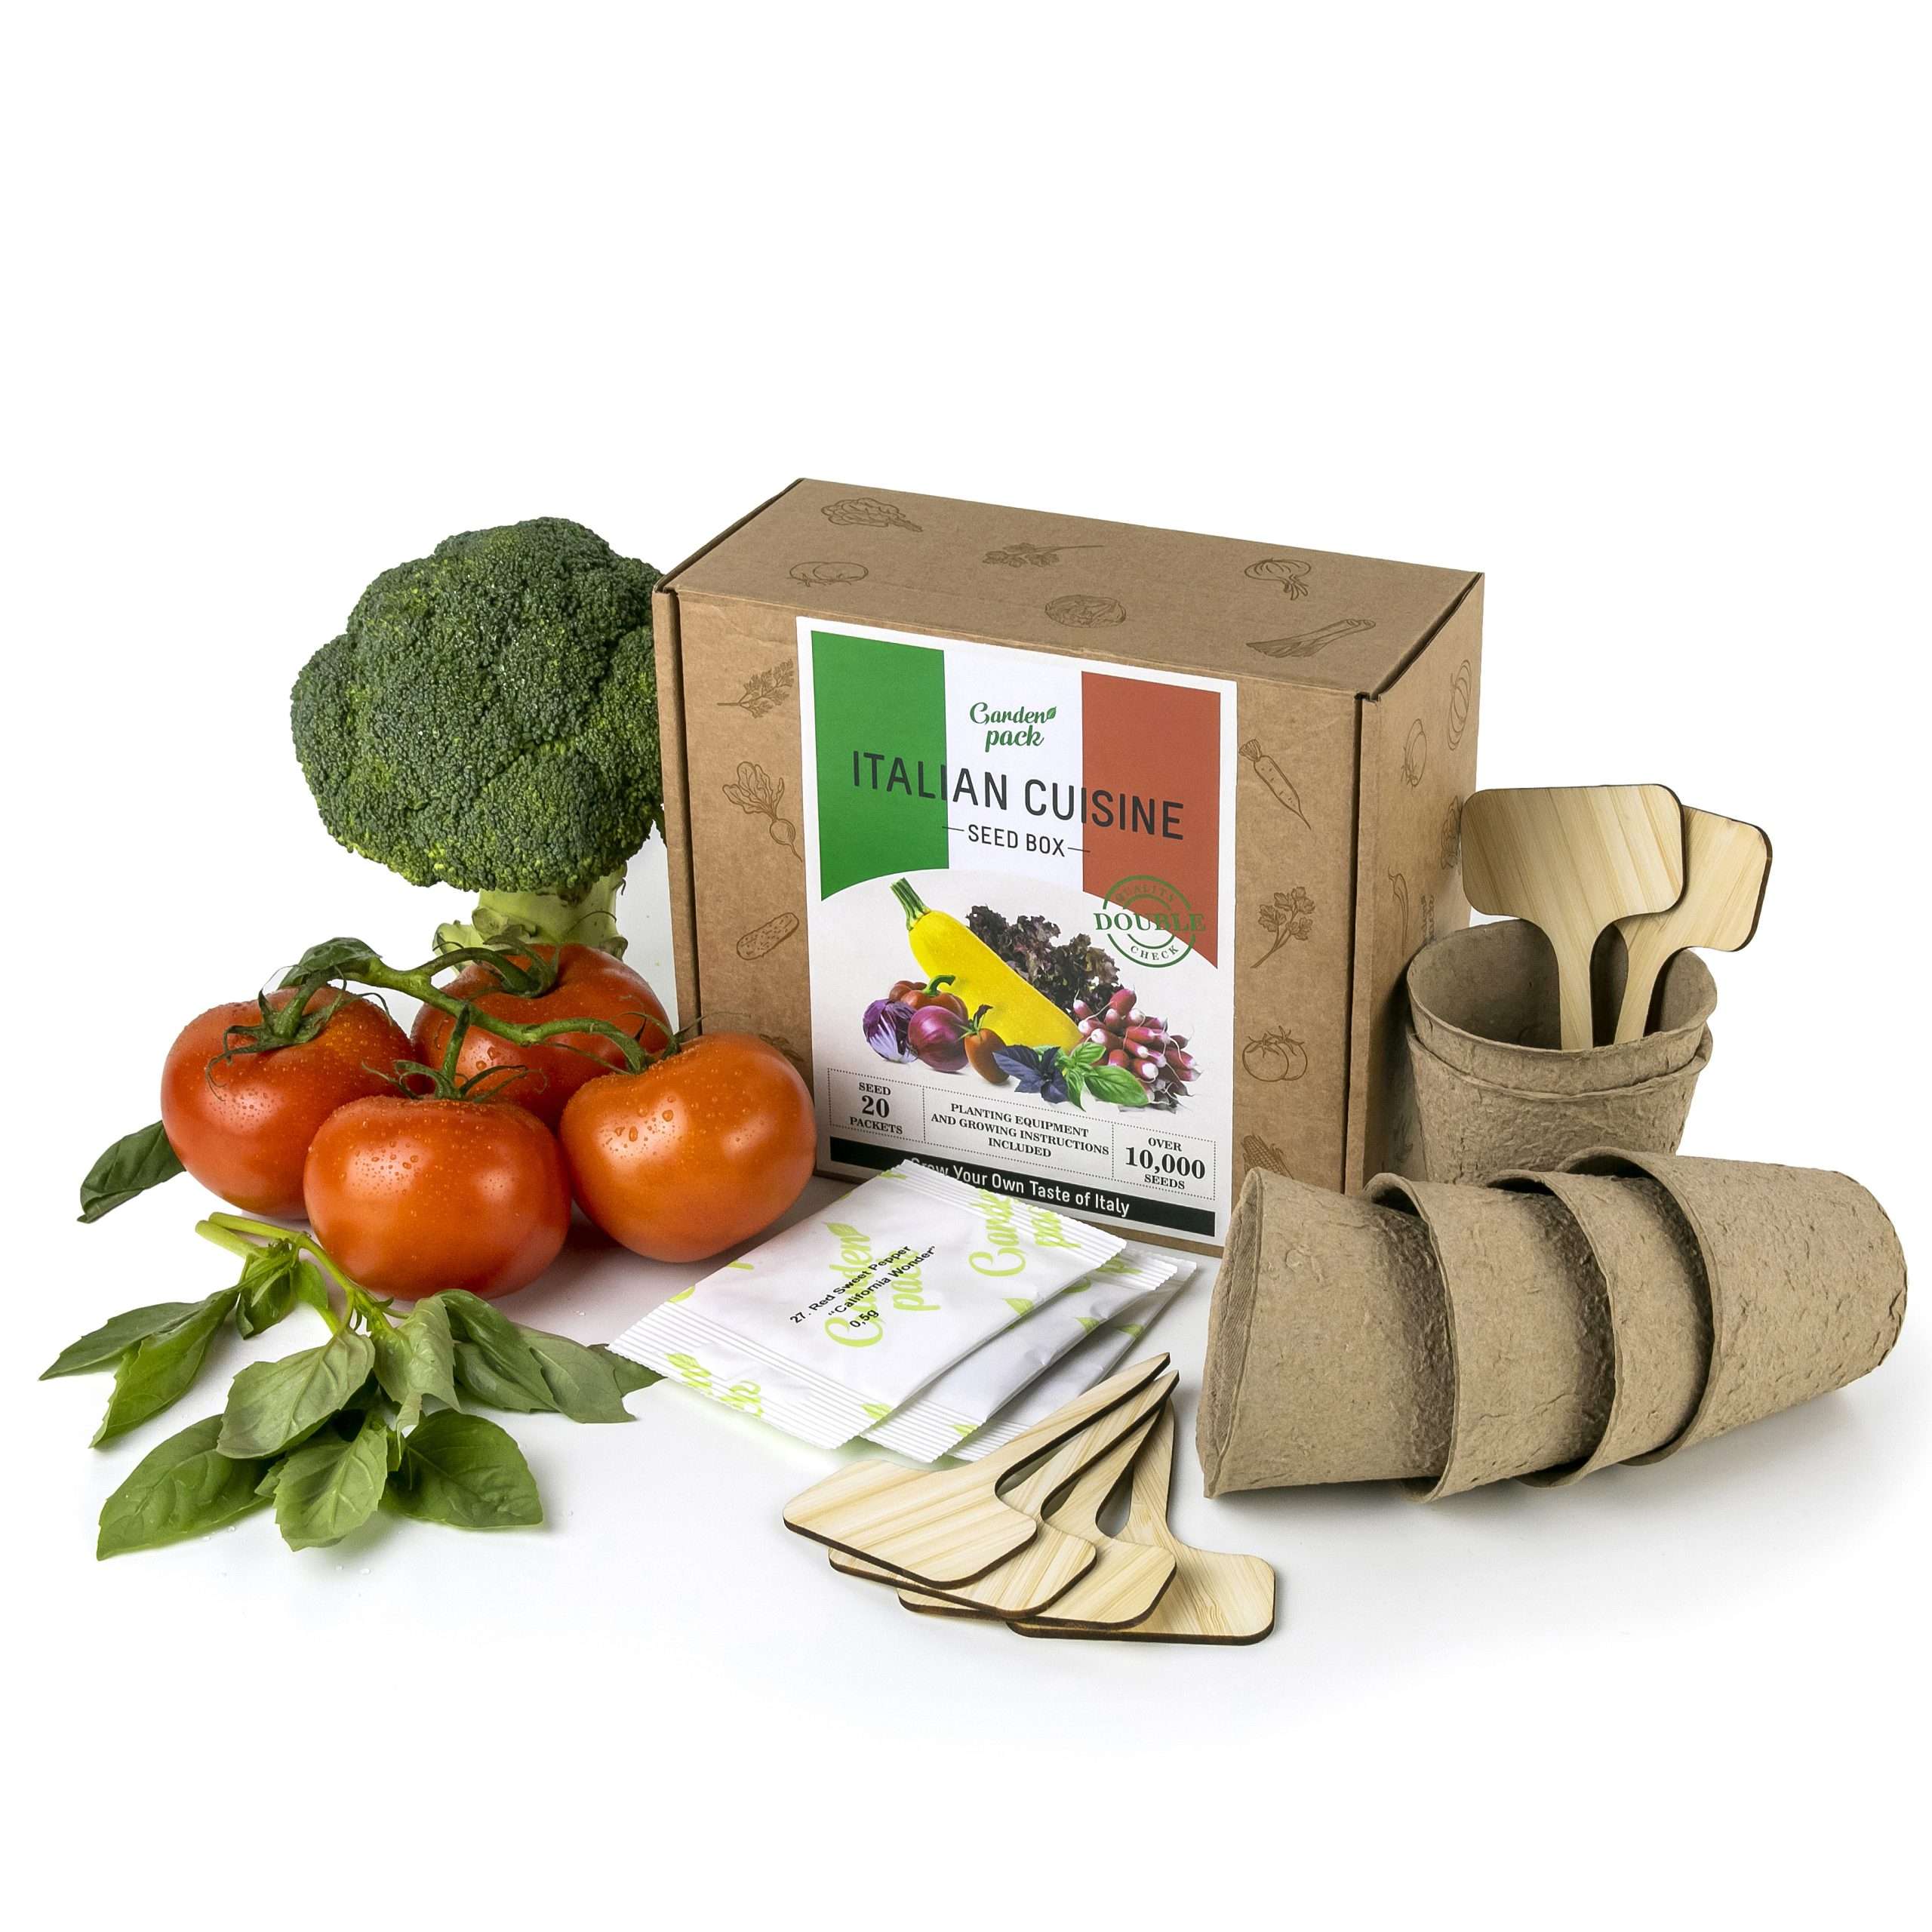 Tomato scaled GROW YOUR SEED COLLECTION of 20 most popular Italian ingredient varieties in one seed starter kit features veggies and culinary herb seeds no Italian dish can do without!   <strong>What's included:</strong> <ul> <li>20 of the most popular Italian ingredient varieties: Basil, Parsley, Oregano, Thyme, Marjoram, and more!</li> <li>2 high quality rubber Gardening Gloves with Claws;</li> <li>6 Biodegradable Peat Pots & 6 Bamboo Plant Markers</li> <li>Easy to follow growing guide;</li> <li>Low Shipping rates;</li> </ul>   <strong><span data-preserver-spaces="true">OUR BEST VALUE GARDENING KIT</span></strong><span data-preserver-spaces="true"> to save money, reduce your carbon footprint & celebrate the natural powers of plants with your vegetable plants & seeds.</span>  